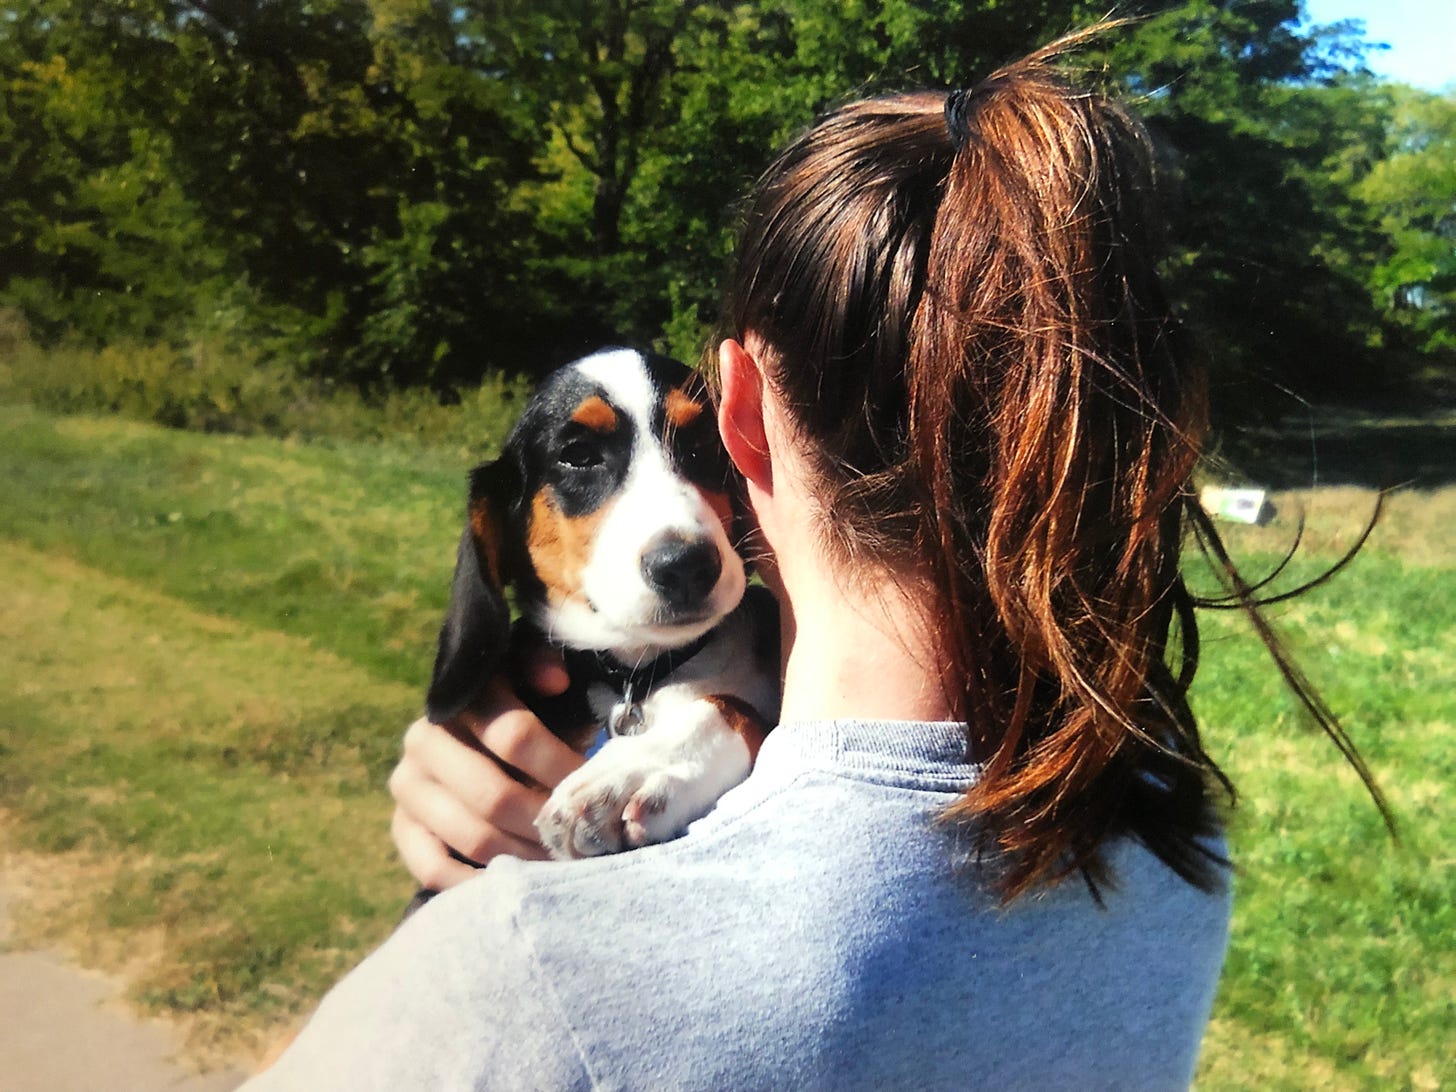 Woman carrying puppy with her back to the camera and the puppy looking over her shoulder.